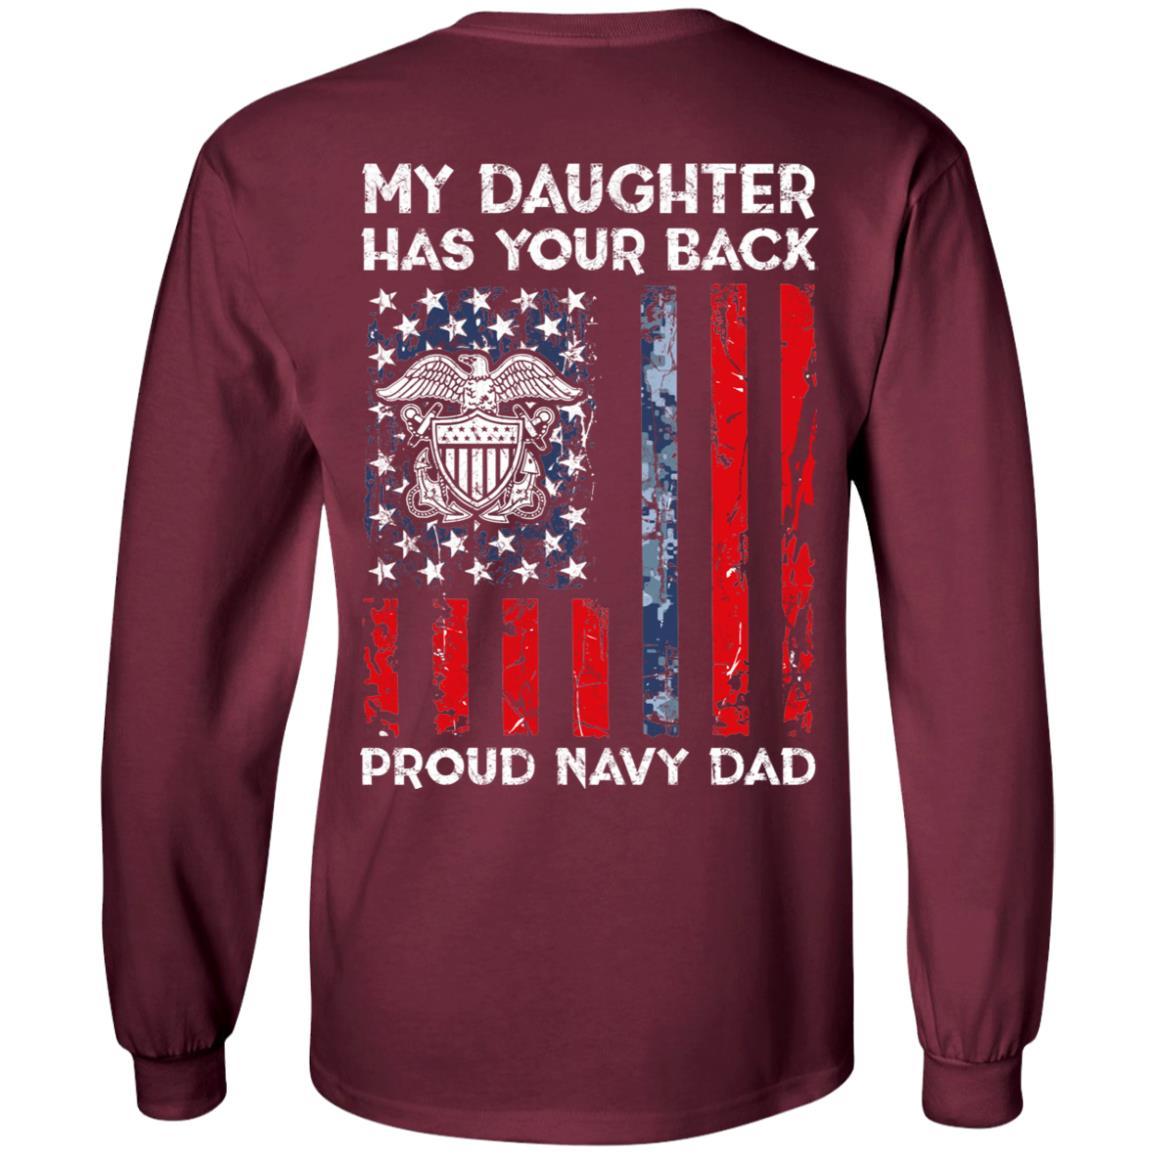 My Daughter Has Your Back - Proud Navy Dad Men T Shirt On Back-TShirt-Navy-Veterans Nation